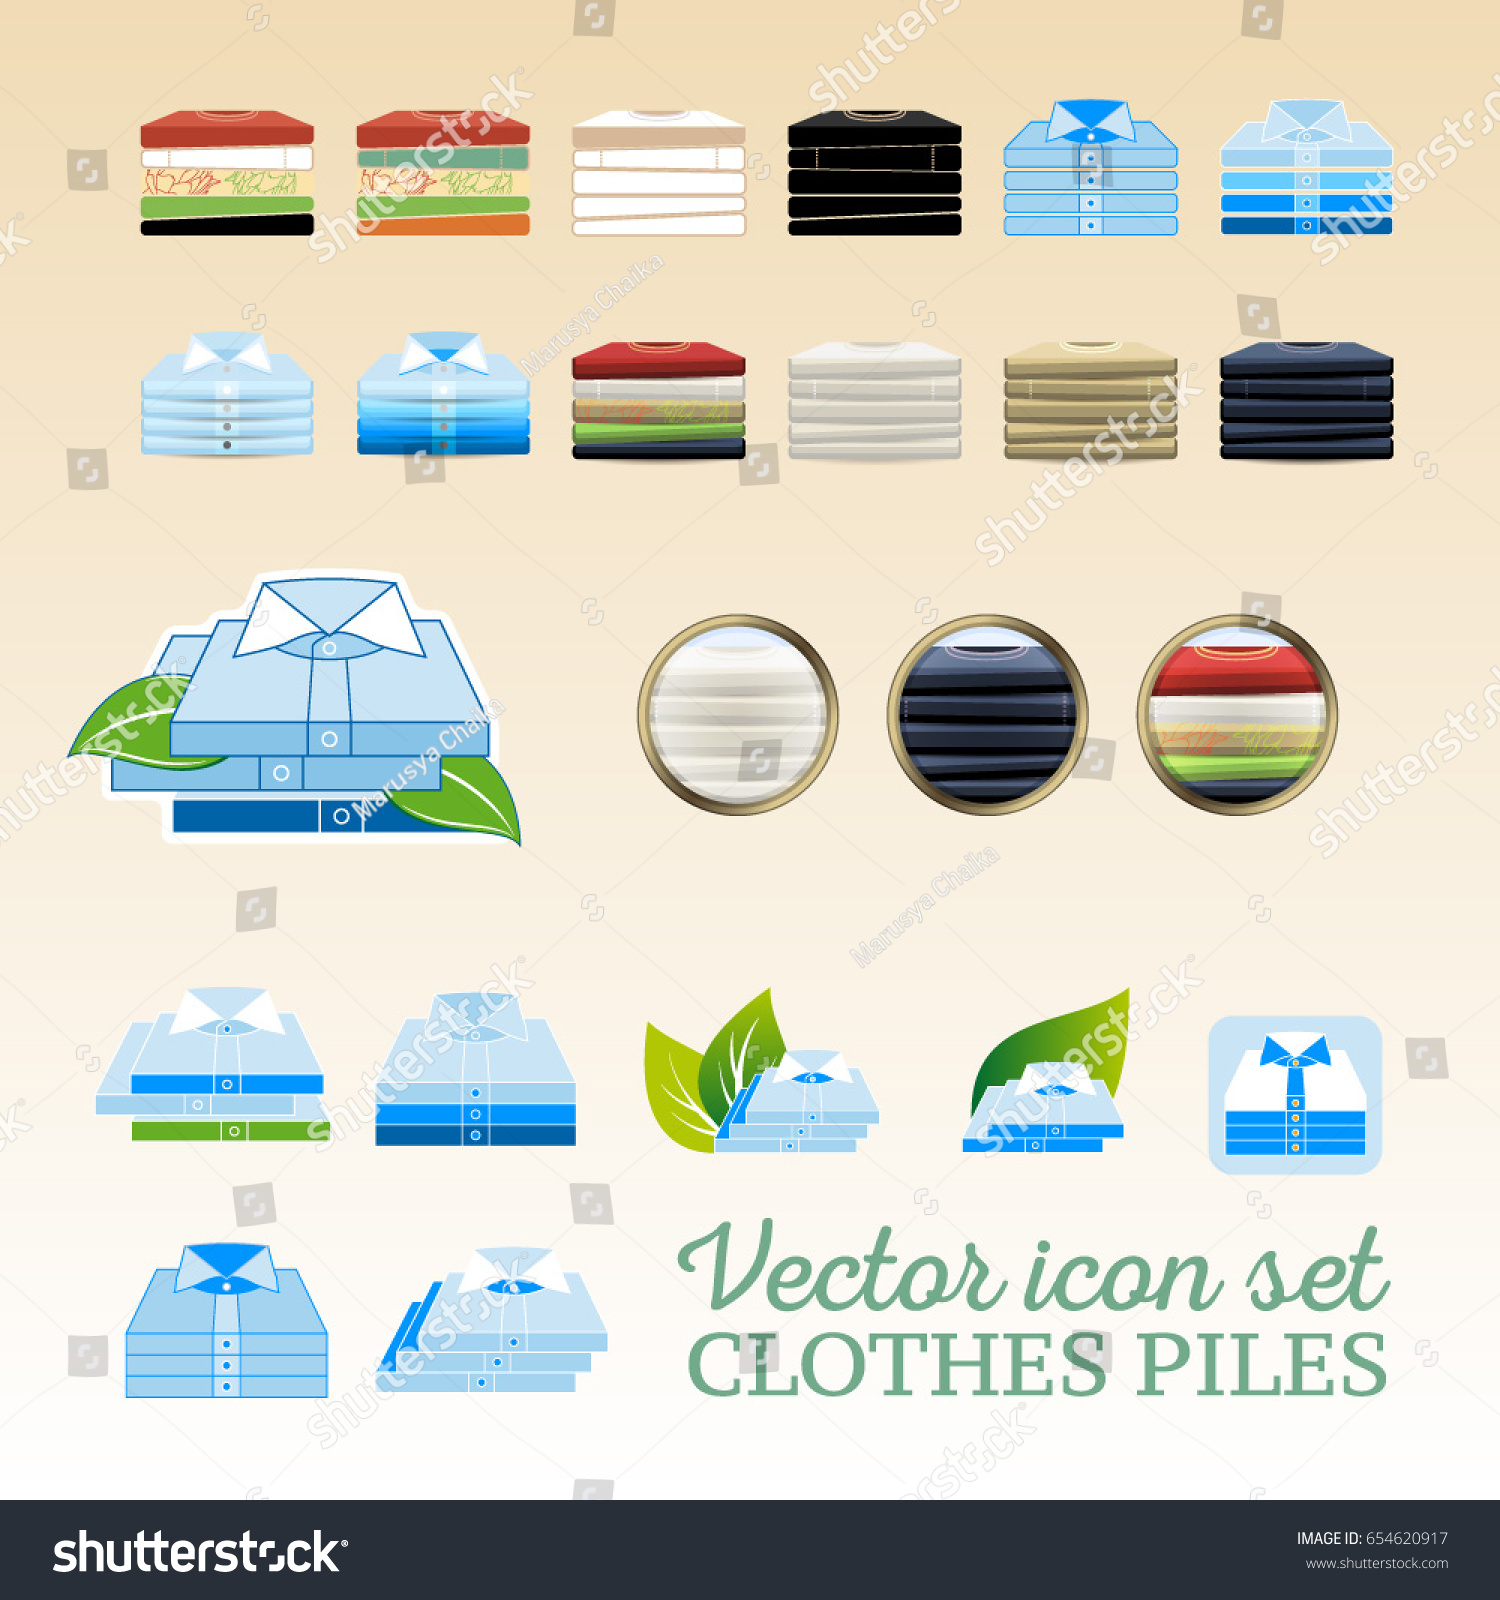 SVG of Vector clothing piles flat and realistic icon set with leaves and shadows. T-shirt piles and undervest piles in different colors. Suitable for washing powder box or print instruction.  svg